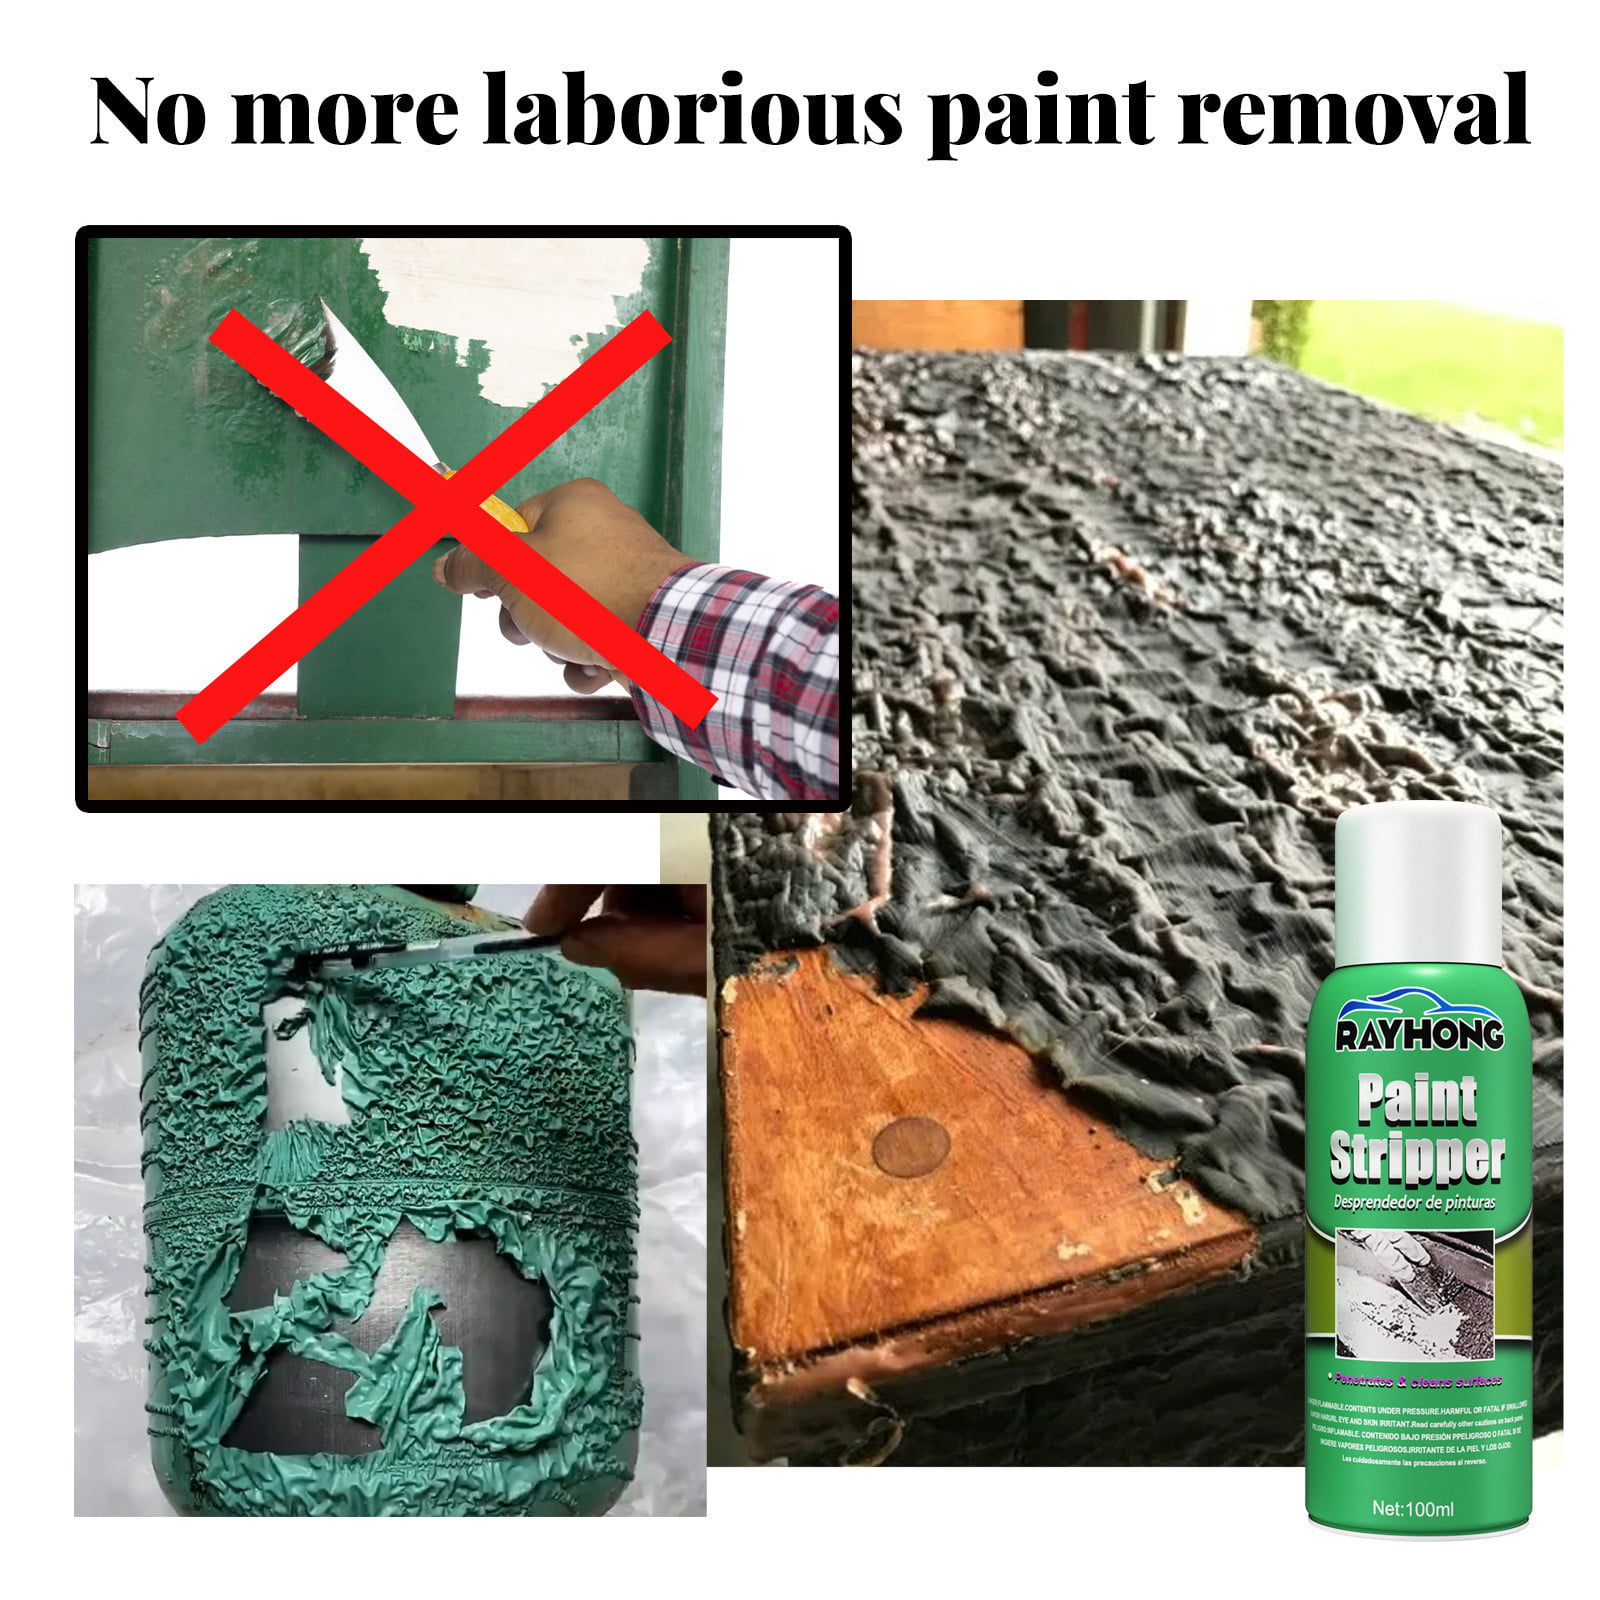 LXINYE Powerful Paint Remover,Paint Stripper Metal,Paint Remover for Metal  Surfaces,Paint Remover from Wood,Paint Stripper Wood,Efficient Paint